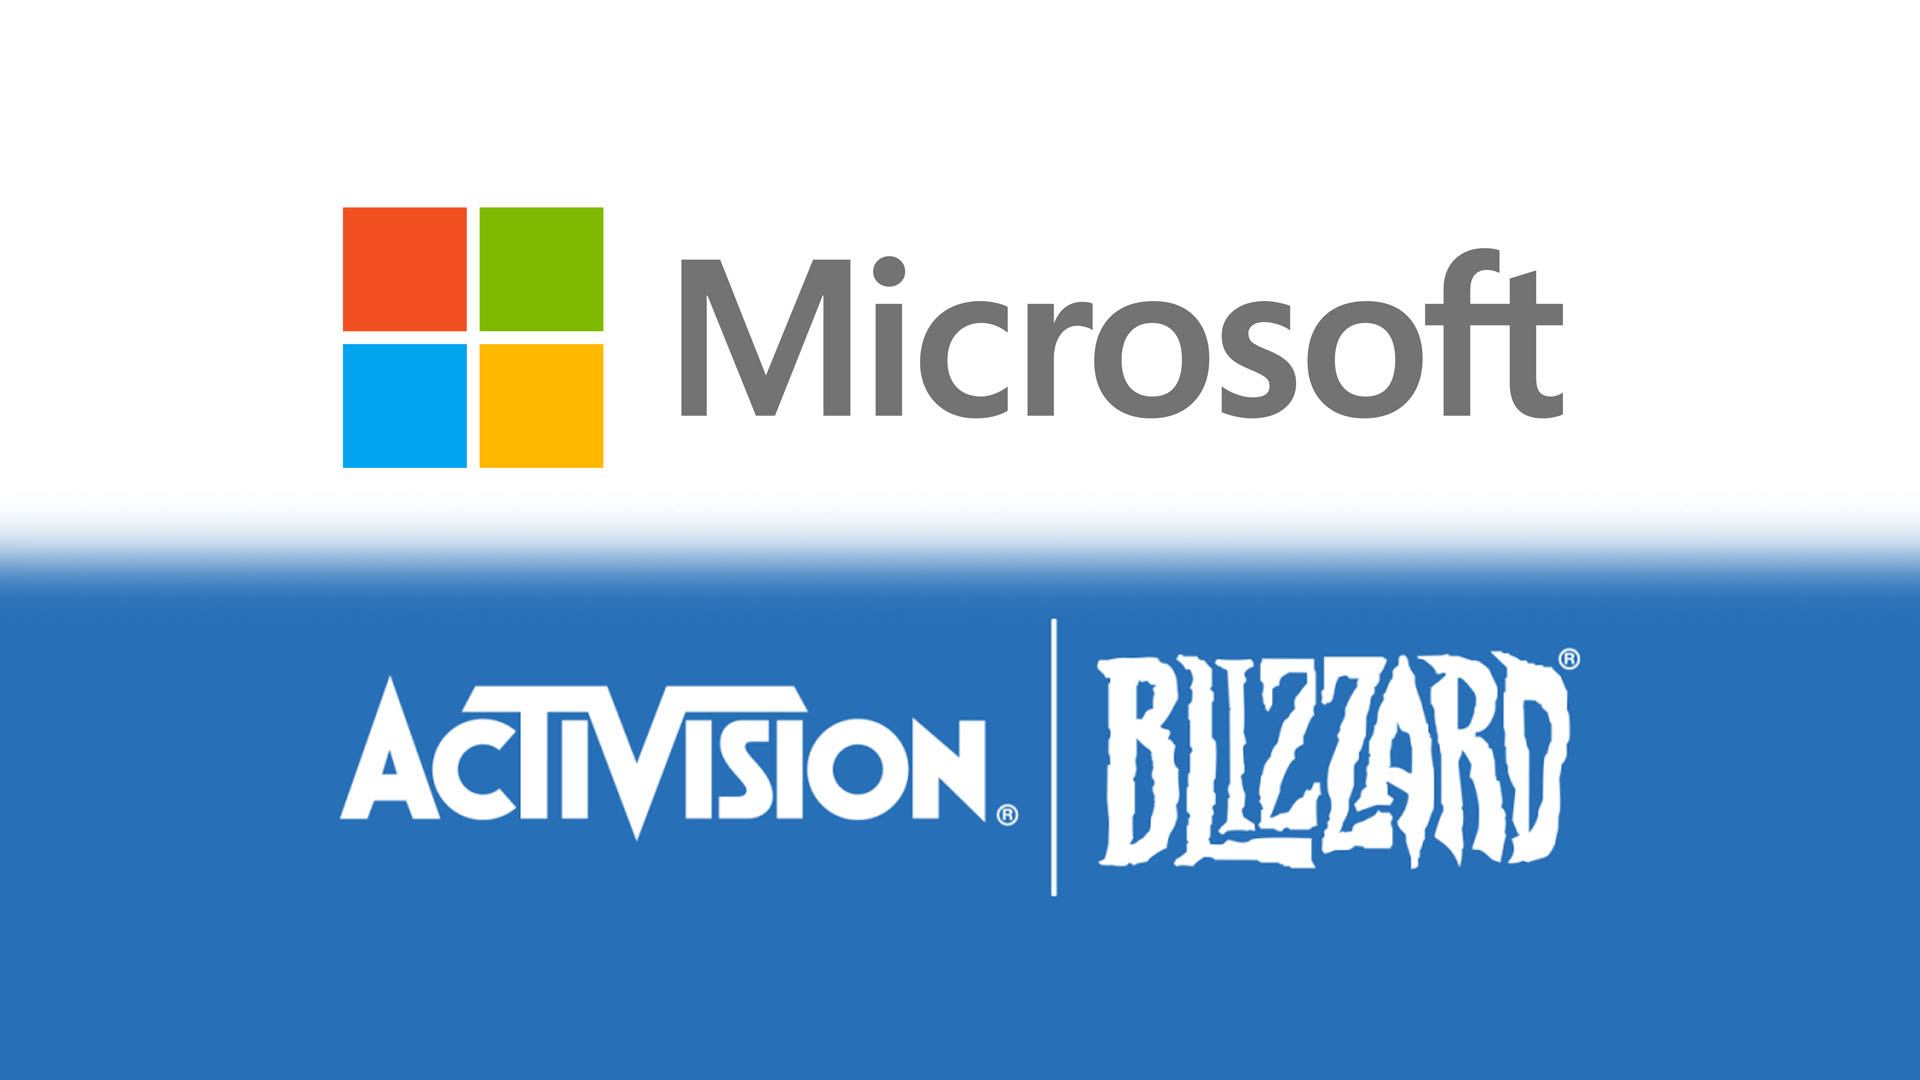 Microsoft's Activision deal set to get UK's CMA approval